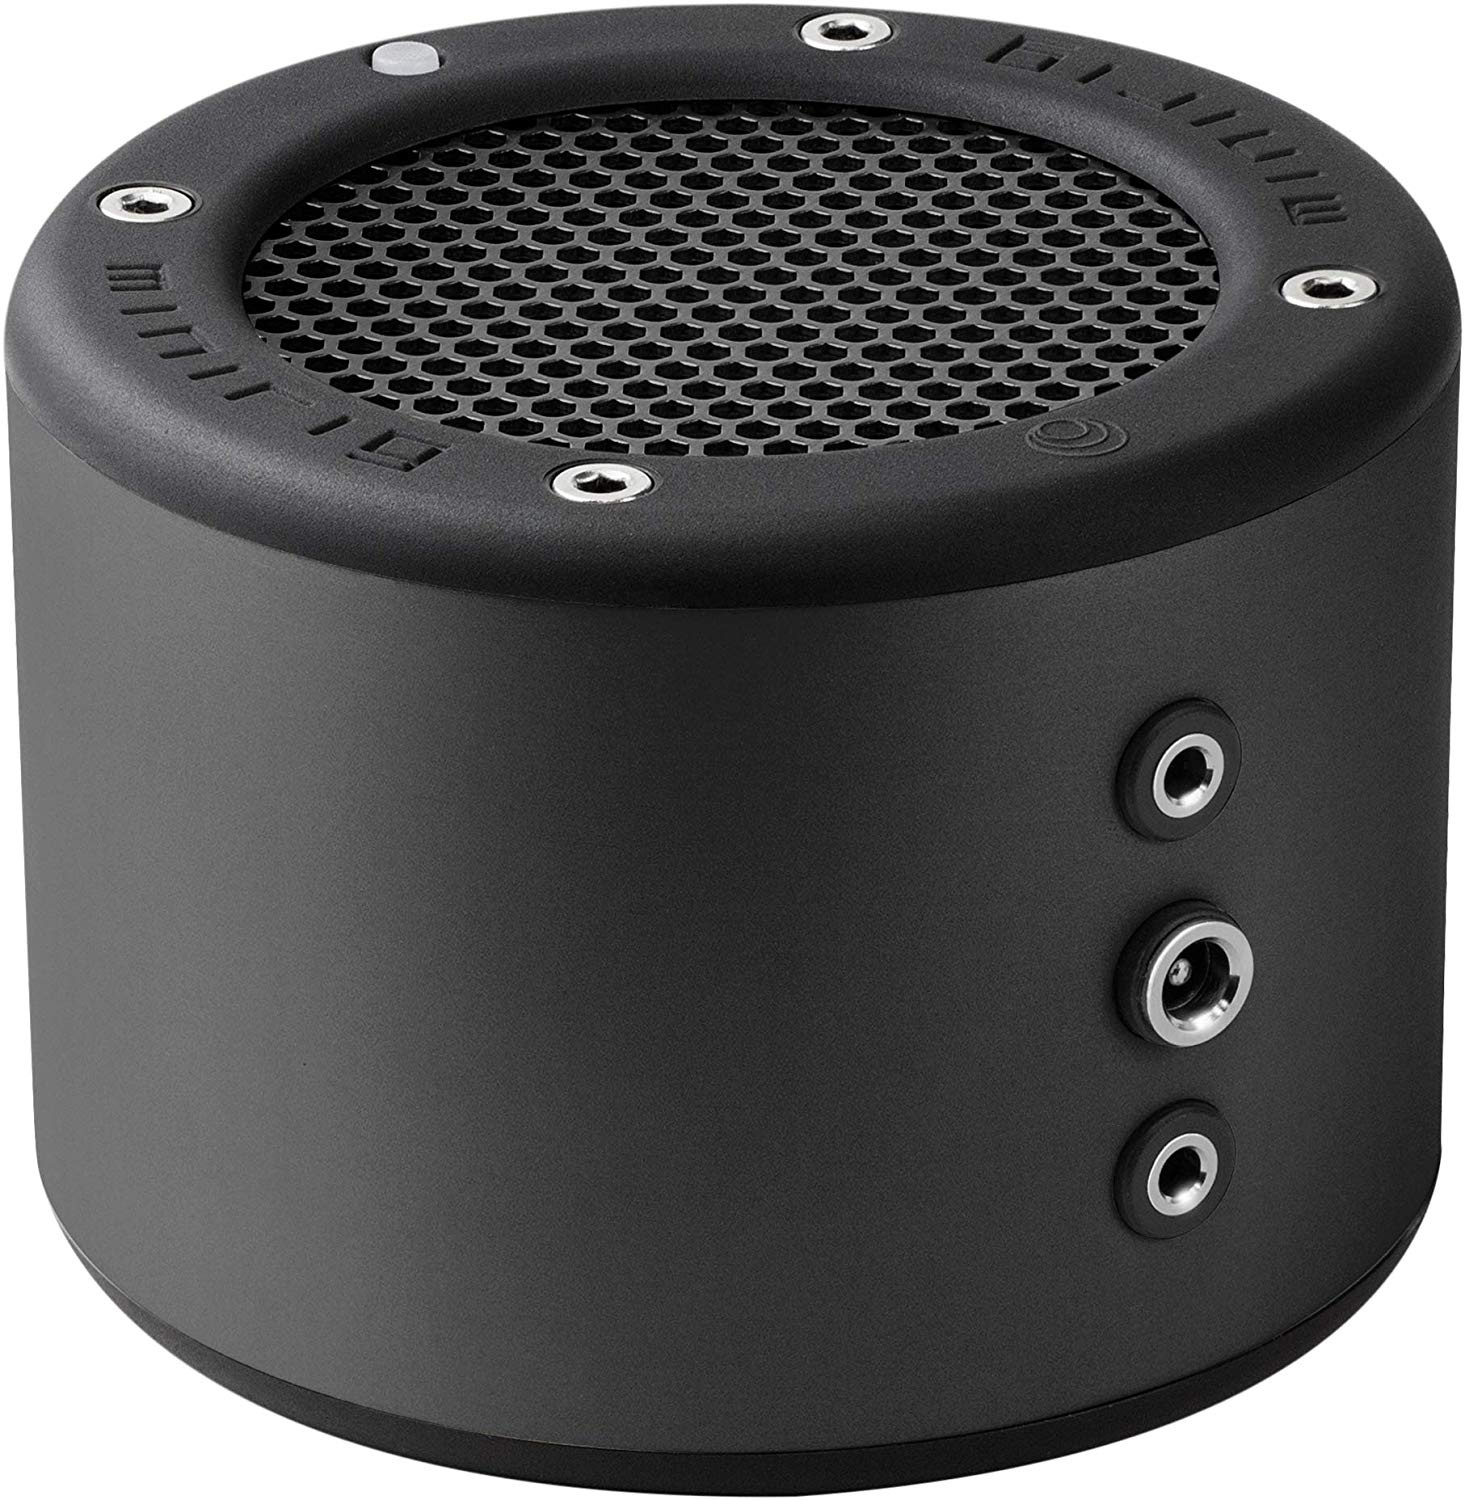 ▷ MiniRig 3 - [Official] Speakers / Subwoofers - HifiGuides Forums